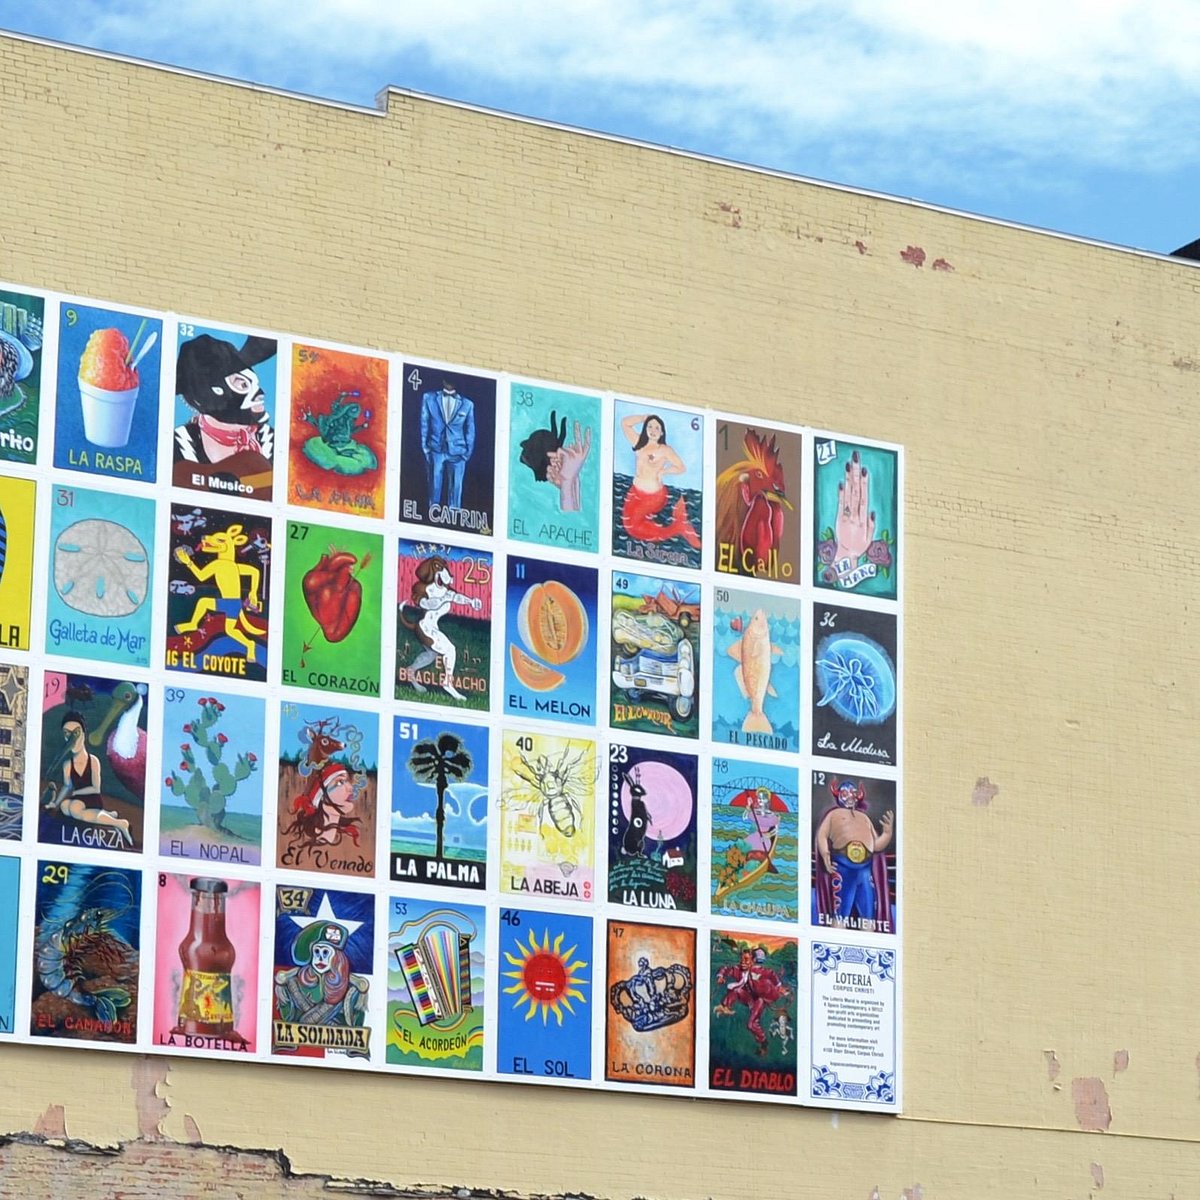 Loteria Corpus Christi Mural - All You Need to Know BEFORE You Go